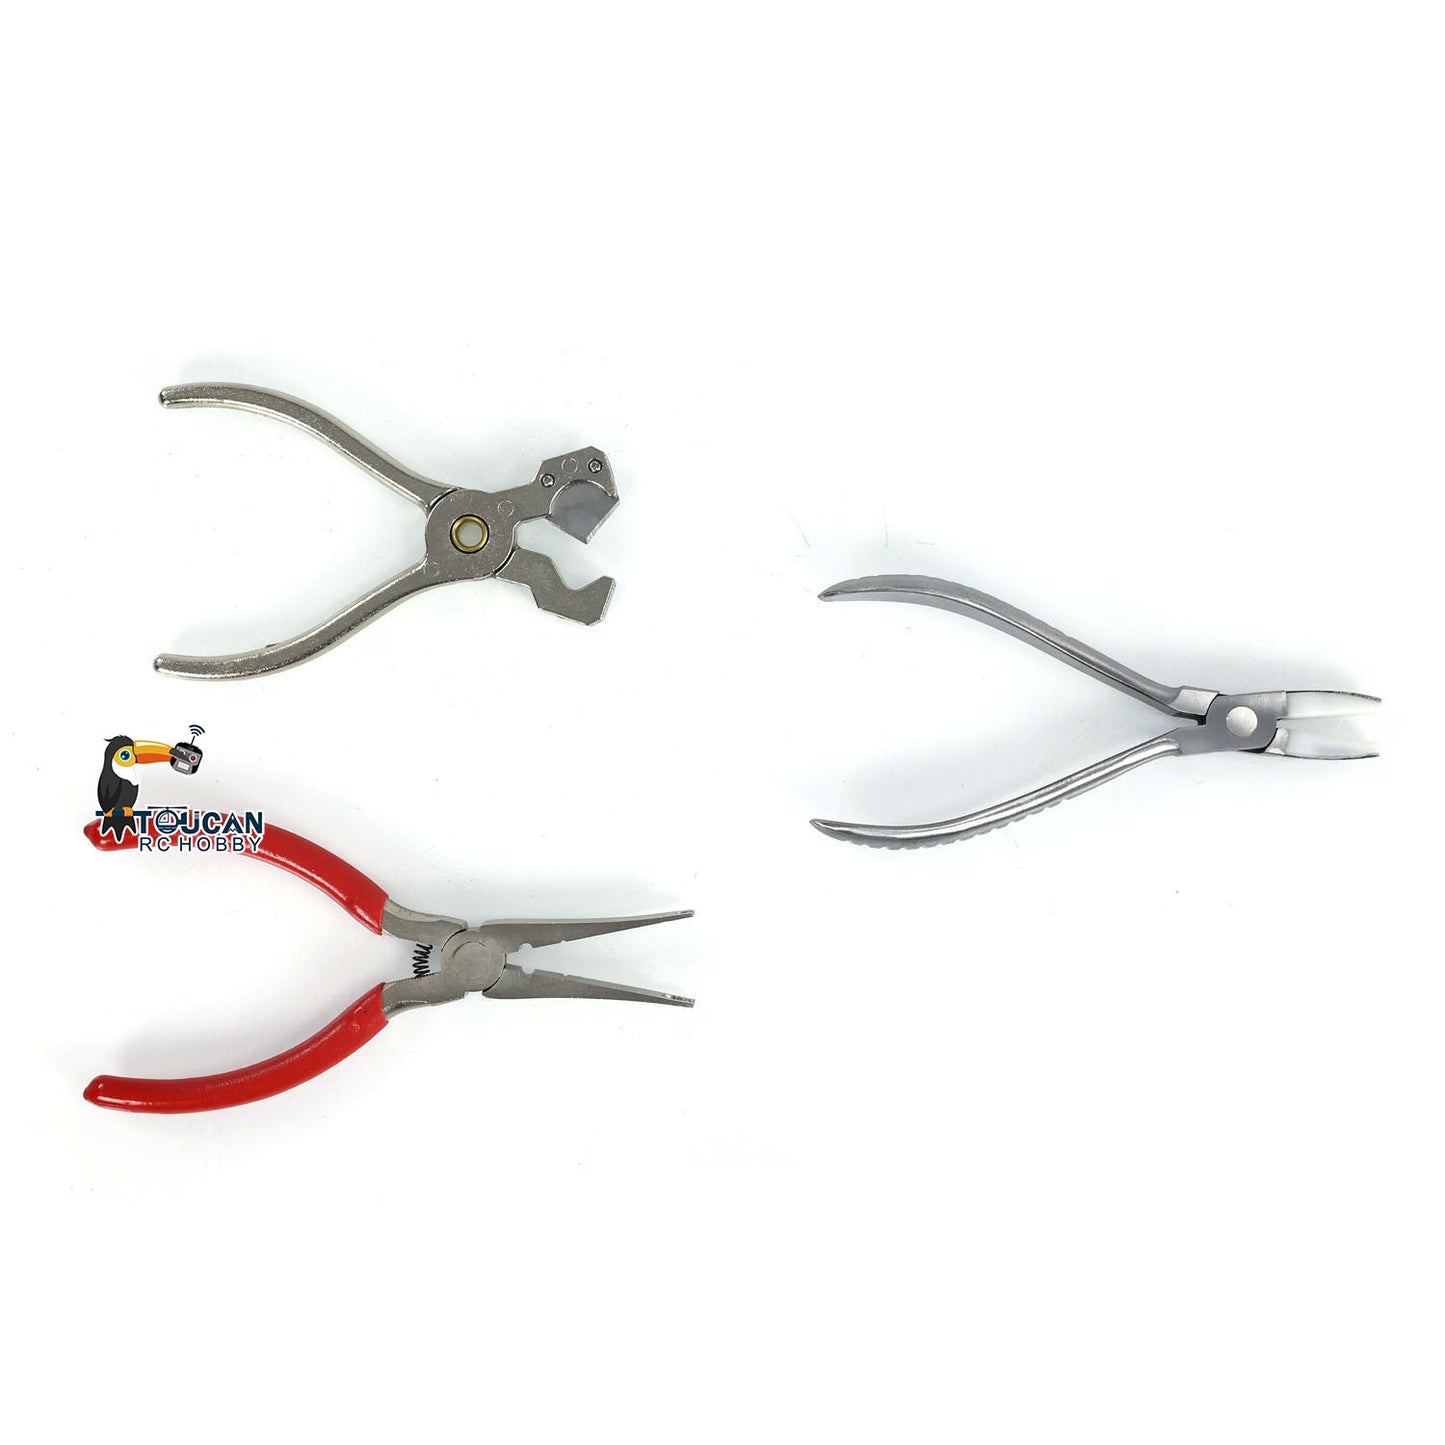 Metal Horse Scissor Oil Tube Shears Flat Nose Pliers for RC Hydraulic Excavator Cars Trucks Radio Controlled Construction Vehicle